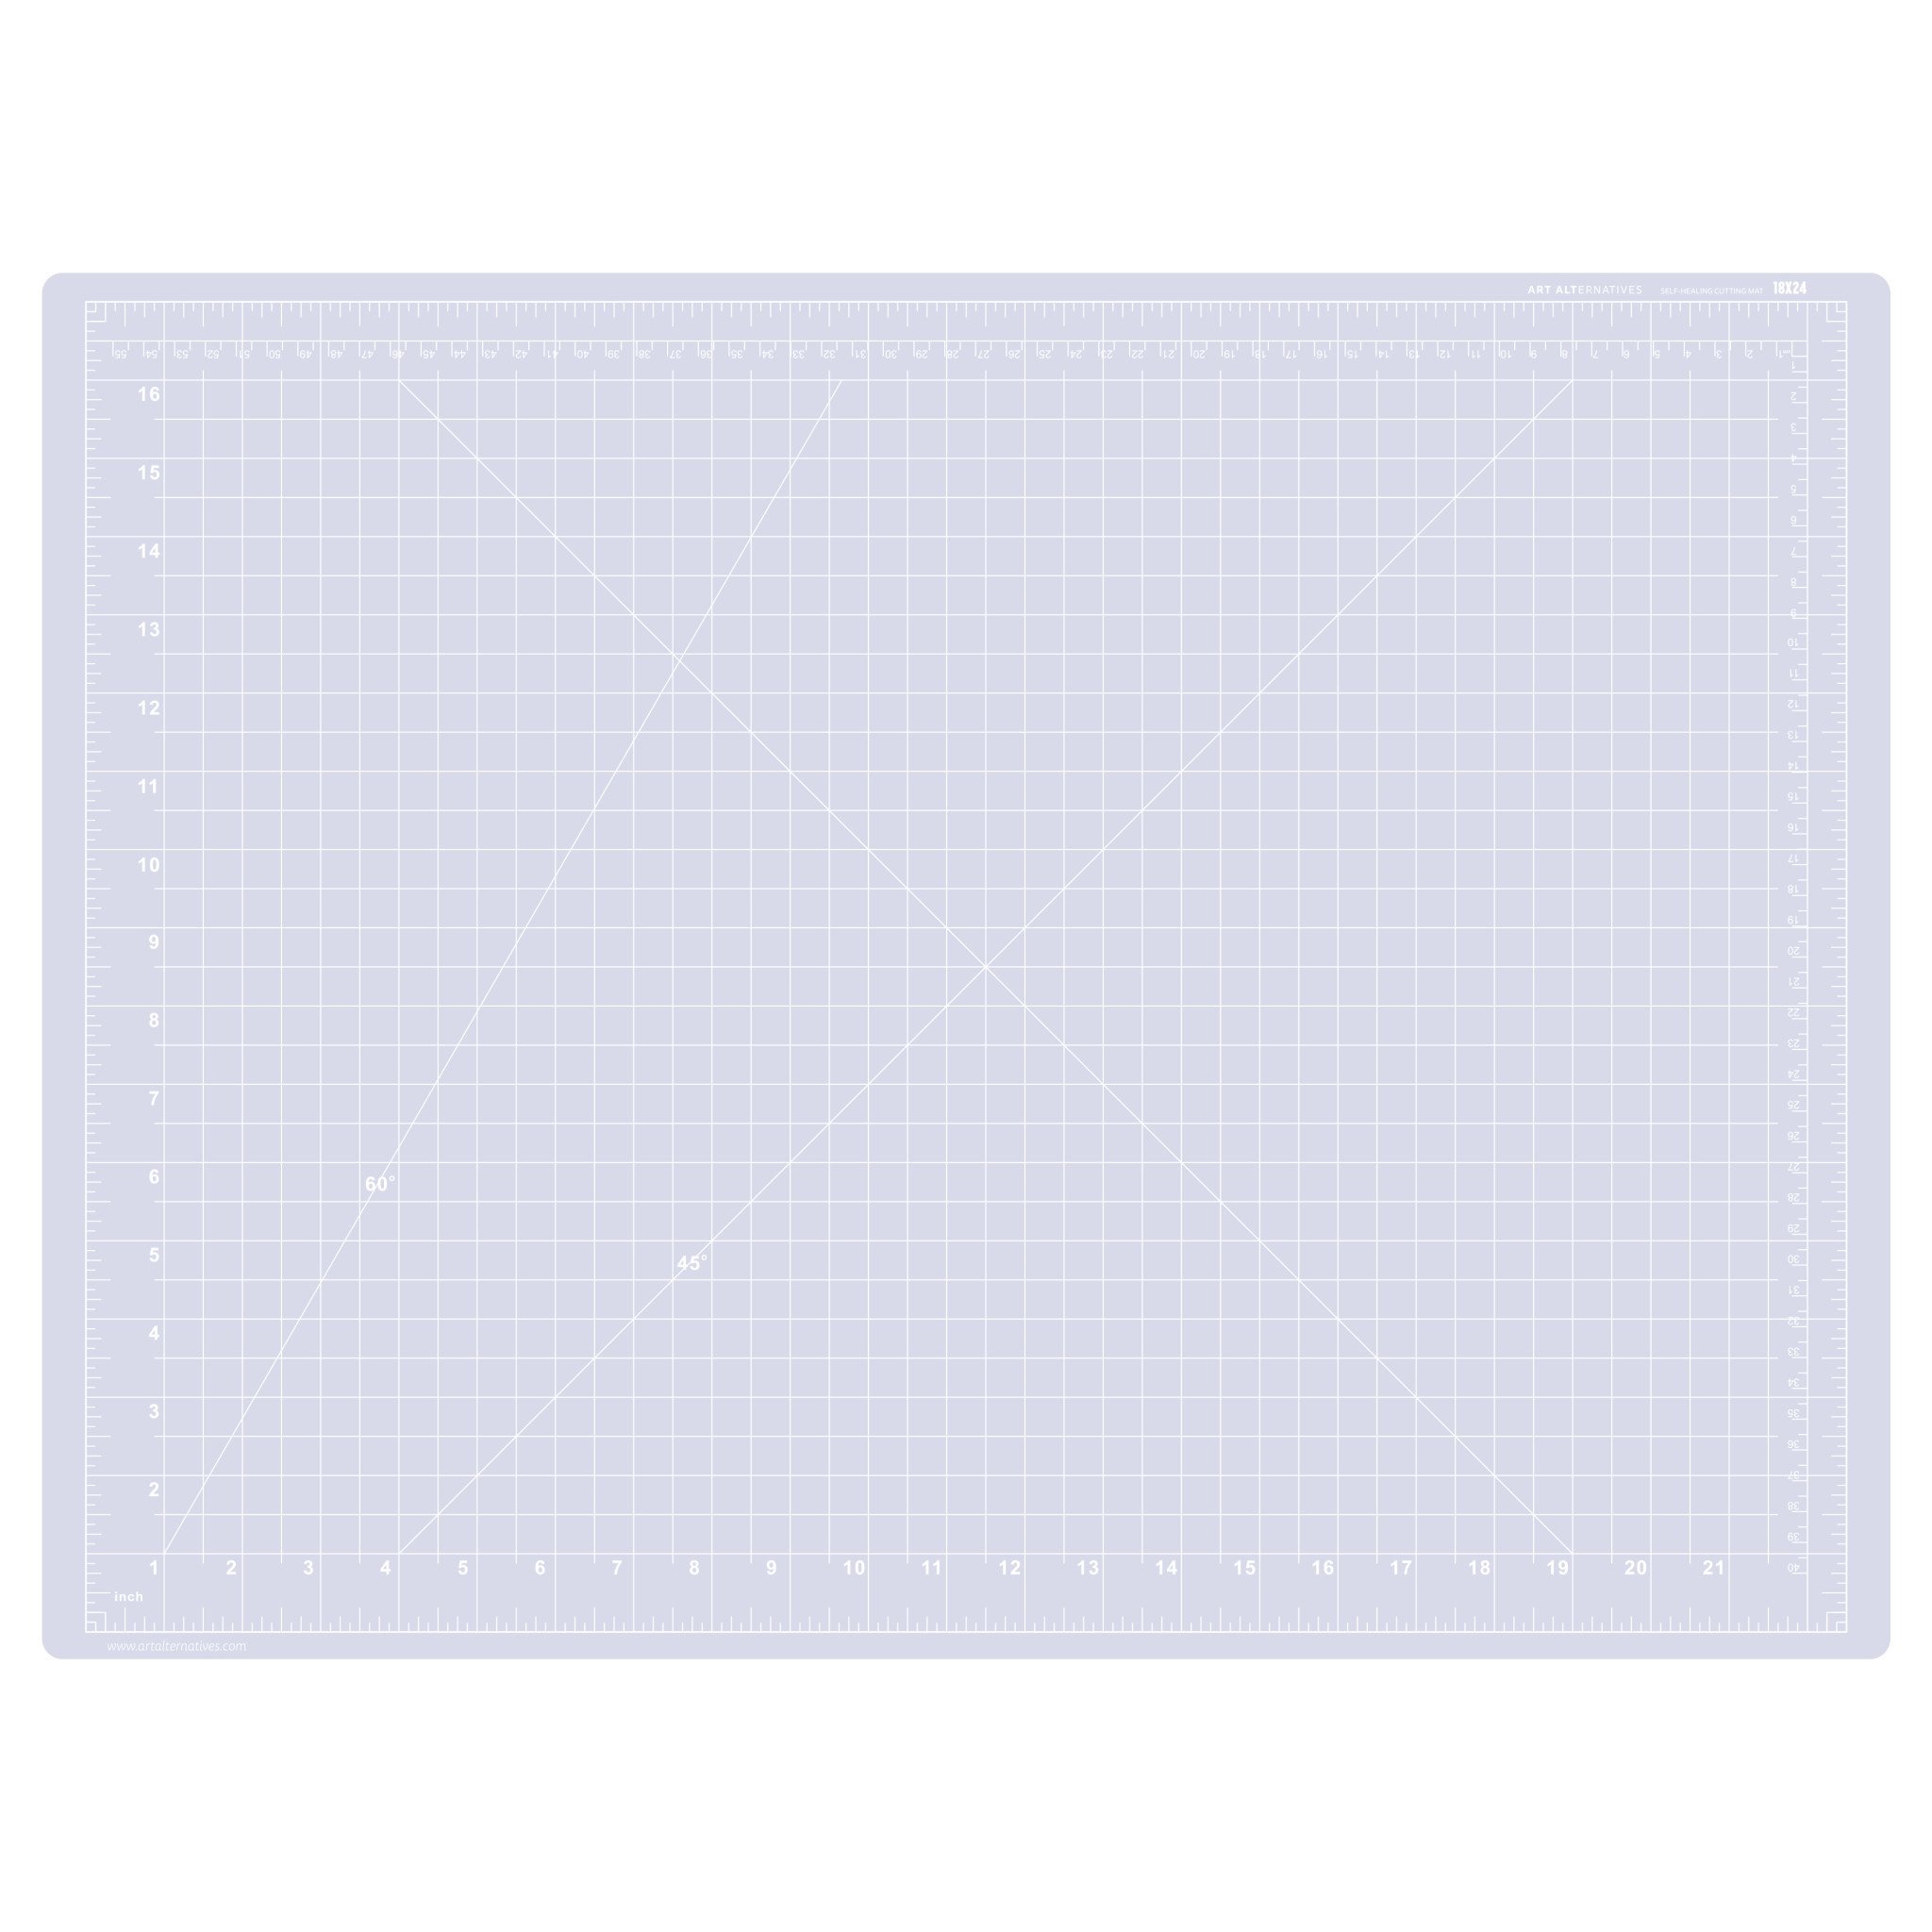 Trim photographs, collage materials, textiles, finished artwork or  stationary safely and efficiently on this self-healing, double-sided cutting  mat. - RISD Store